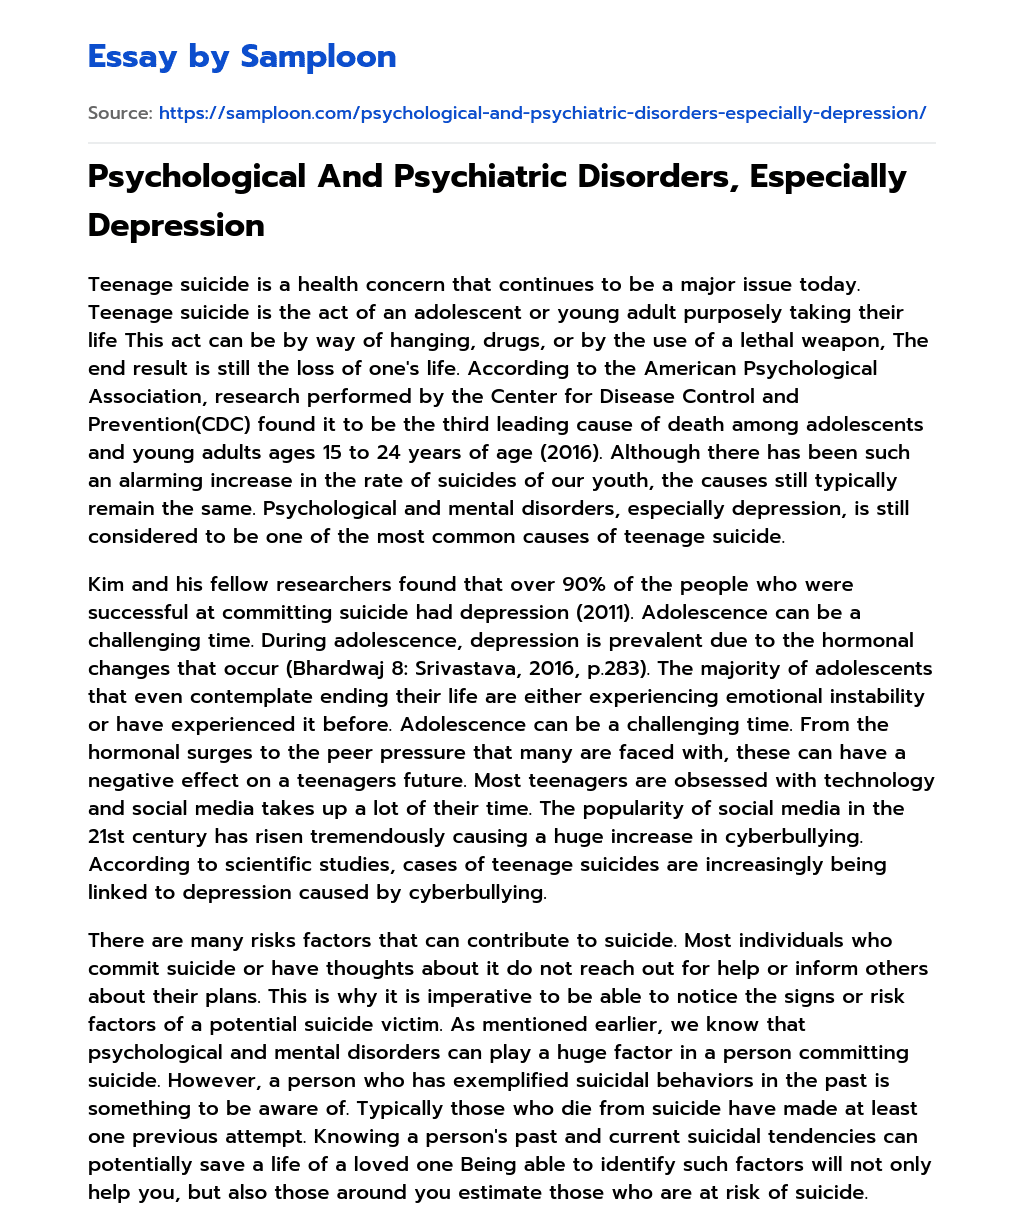 Psychological And Psychiatric Disorders, Especially Depression essay